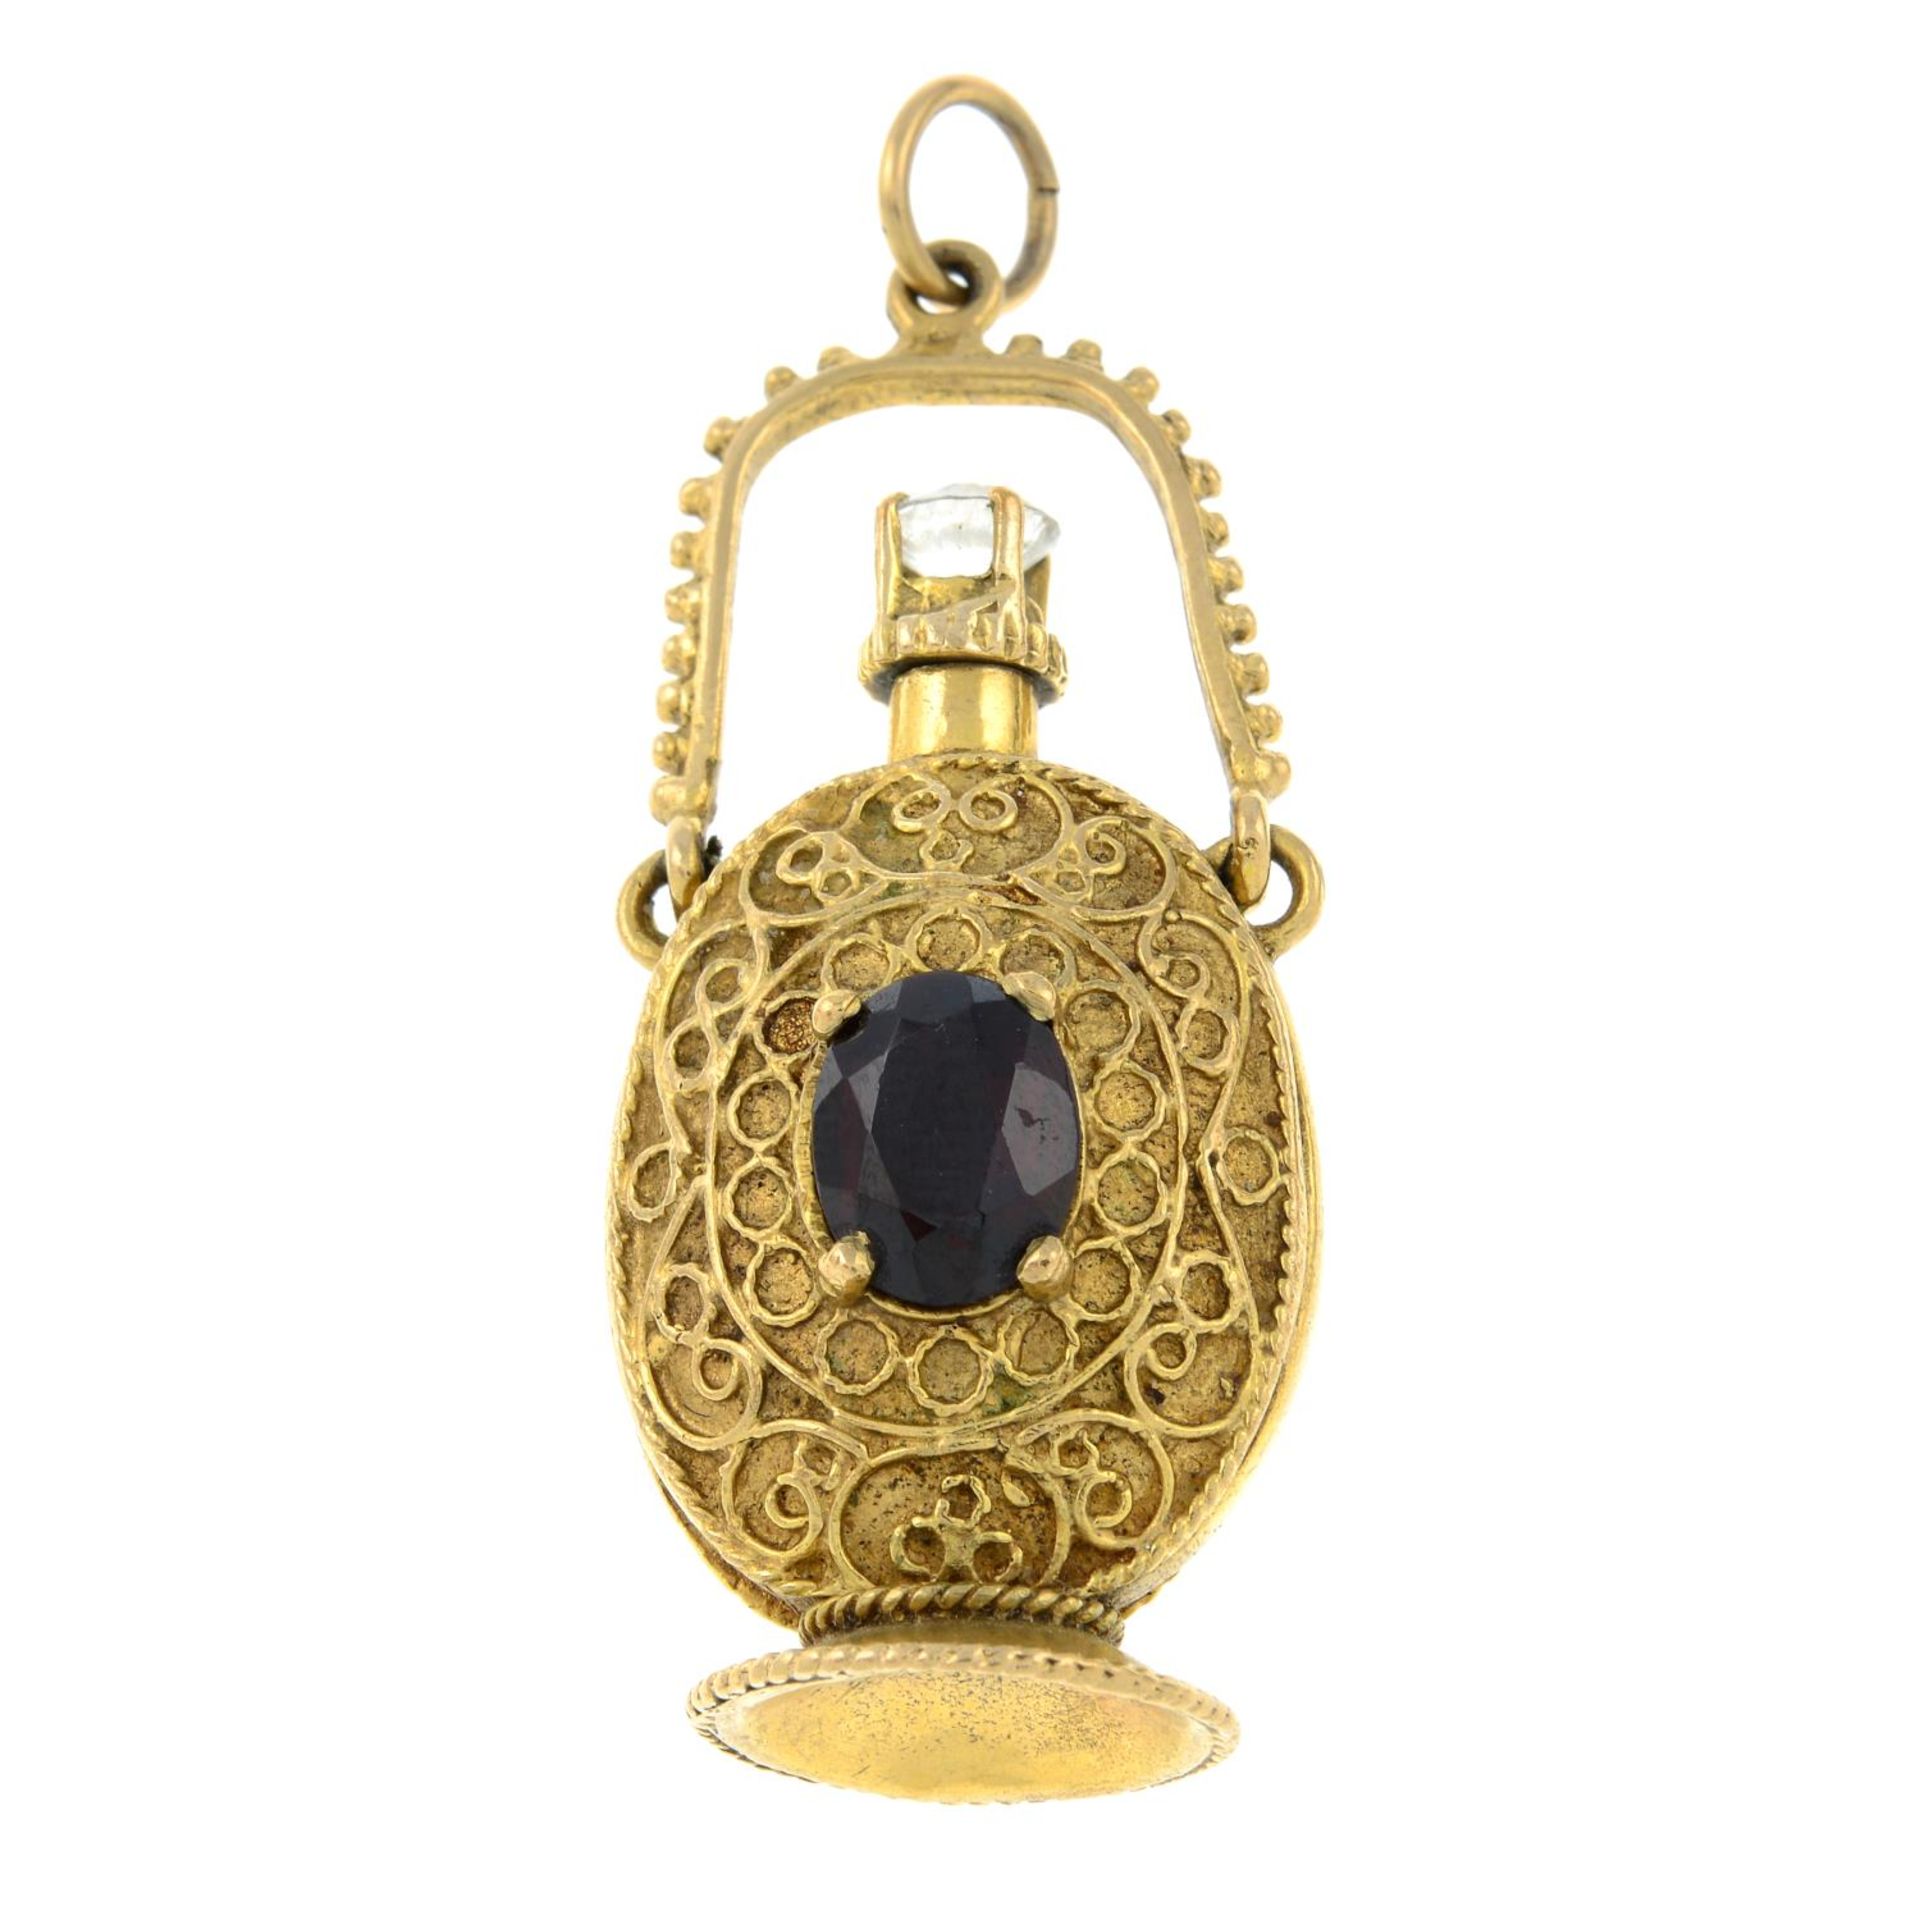 A bottle pendant, with garnet and colourless gem accent.Length 5.2cms.